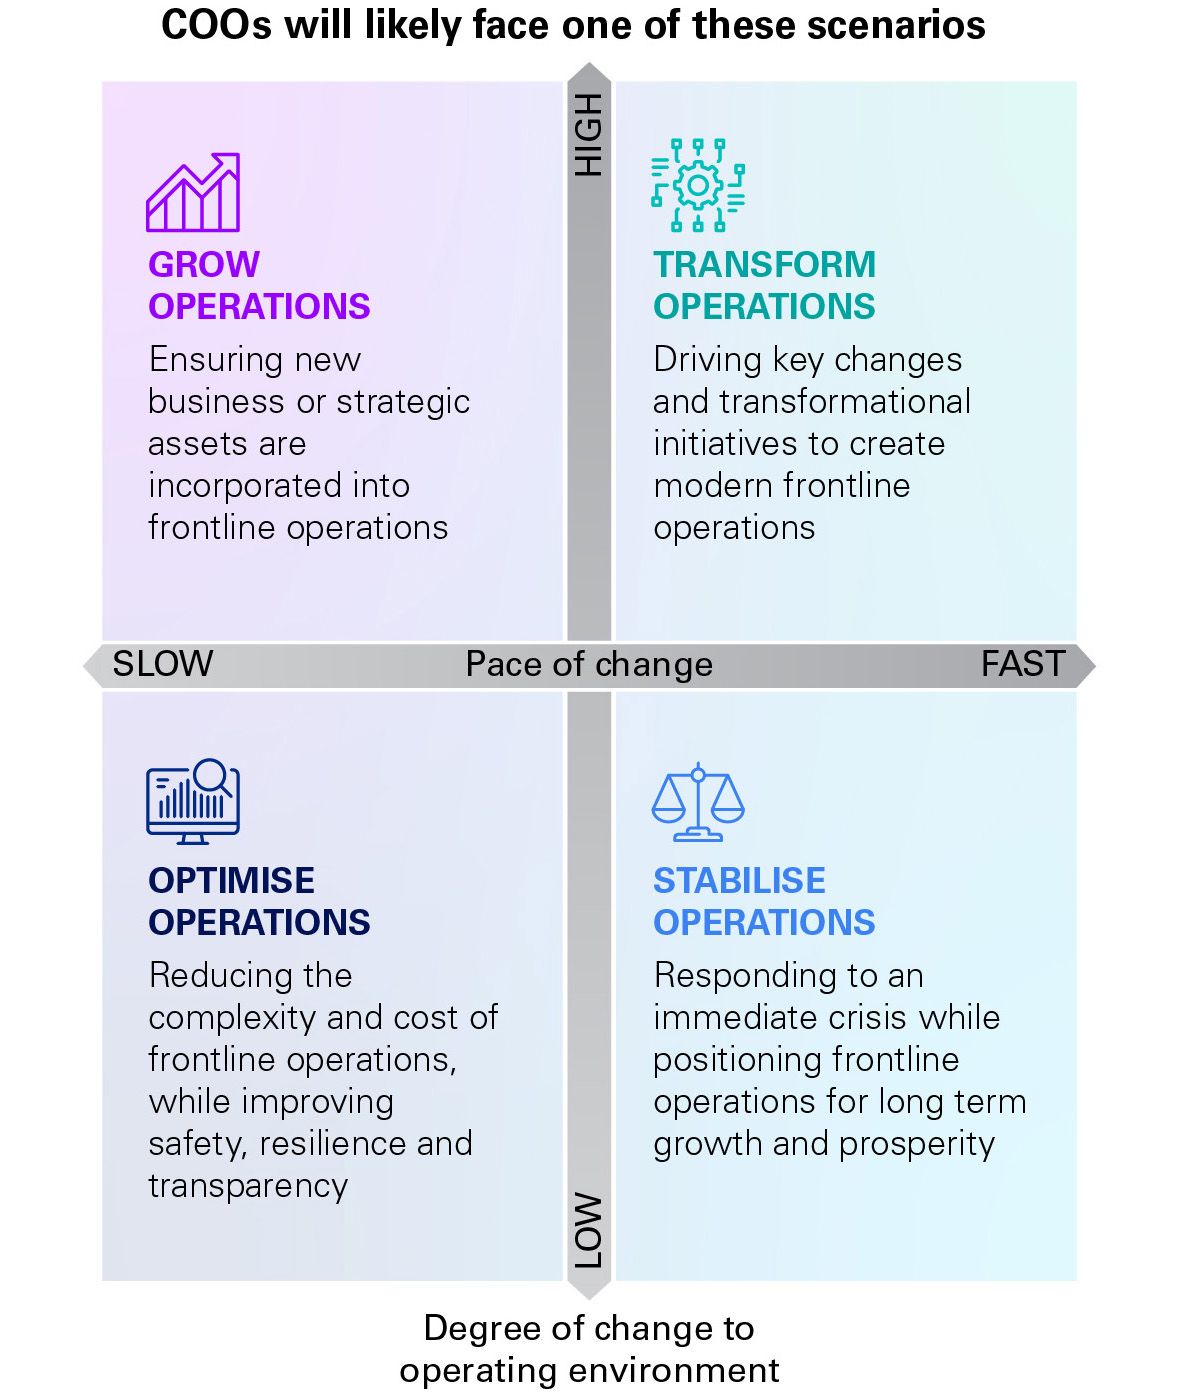 COOs will likely face one of these scenarios: Grow operations, Transform operations, Optimise operations, Stabilise operations